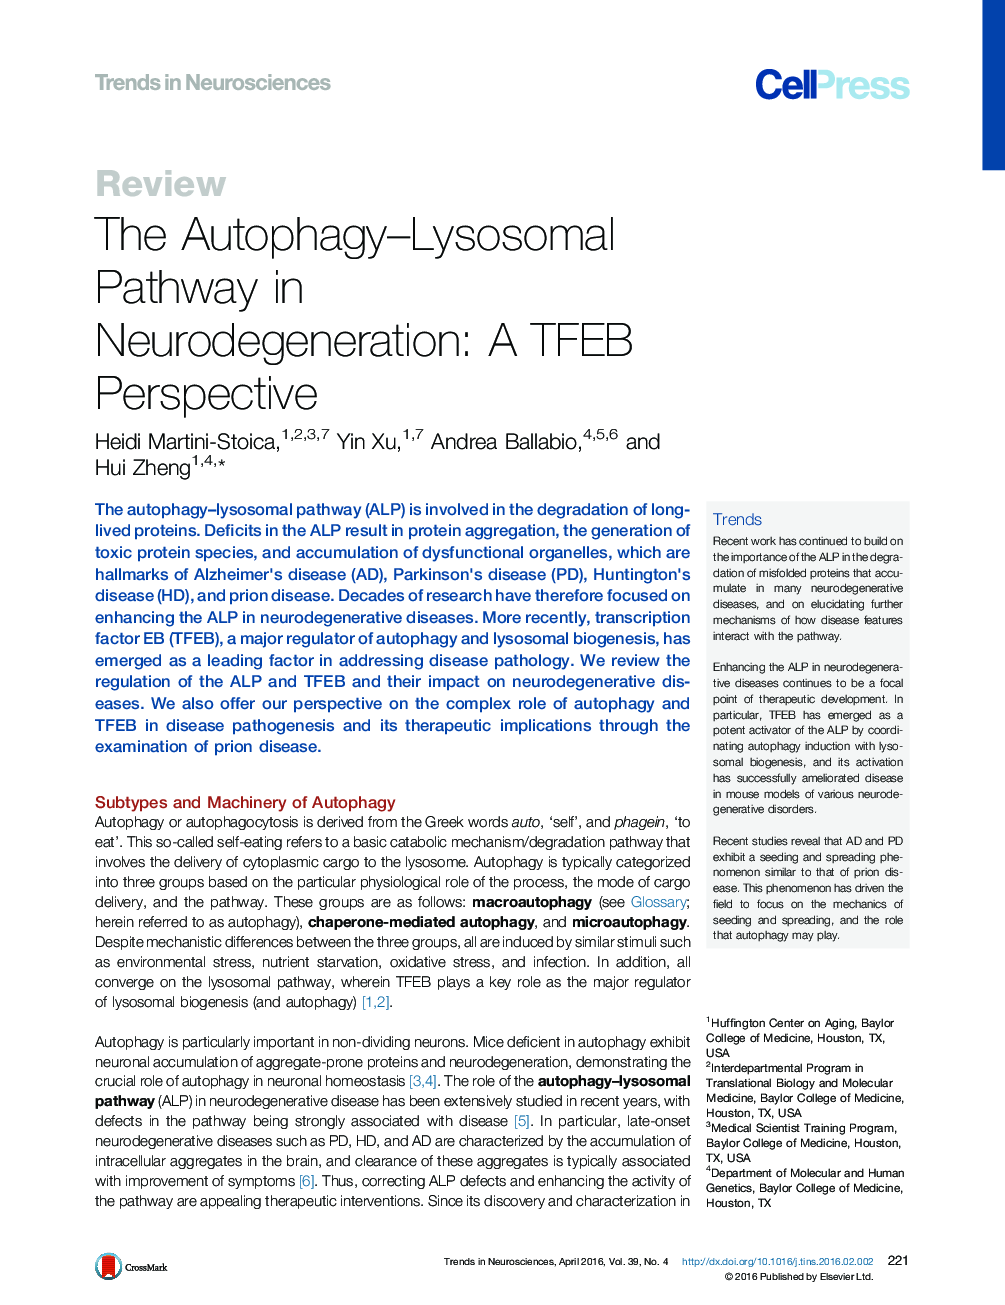 The Autophagy–Lysosomal Pathway in Neurodegeneration: A TFEB Perspective